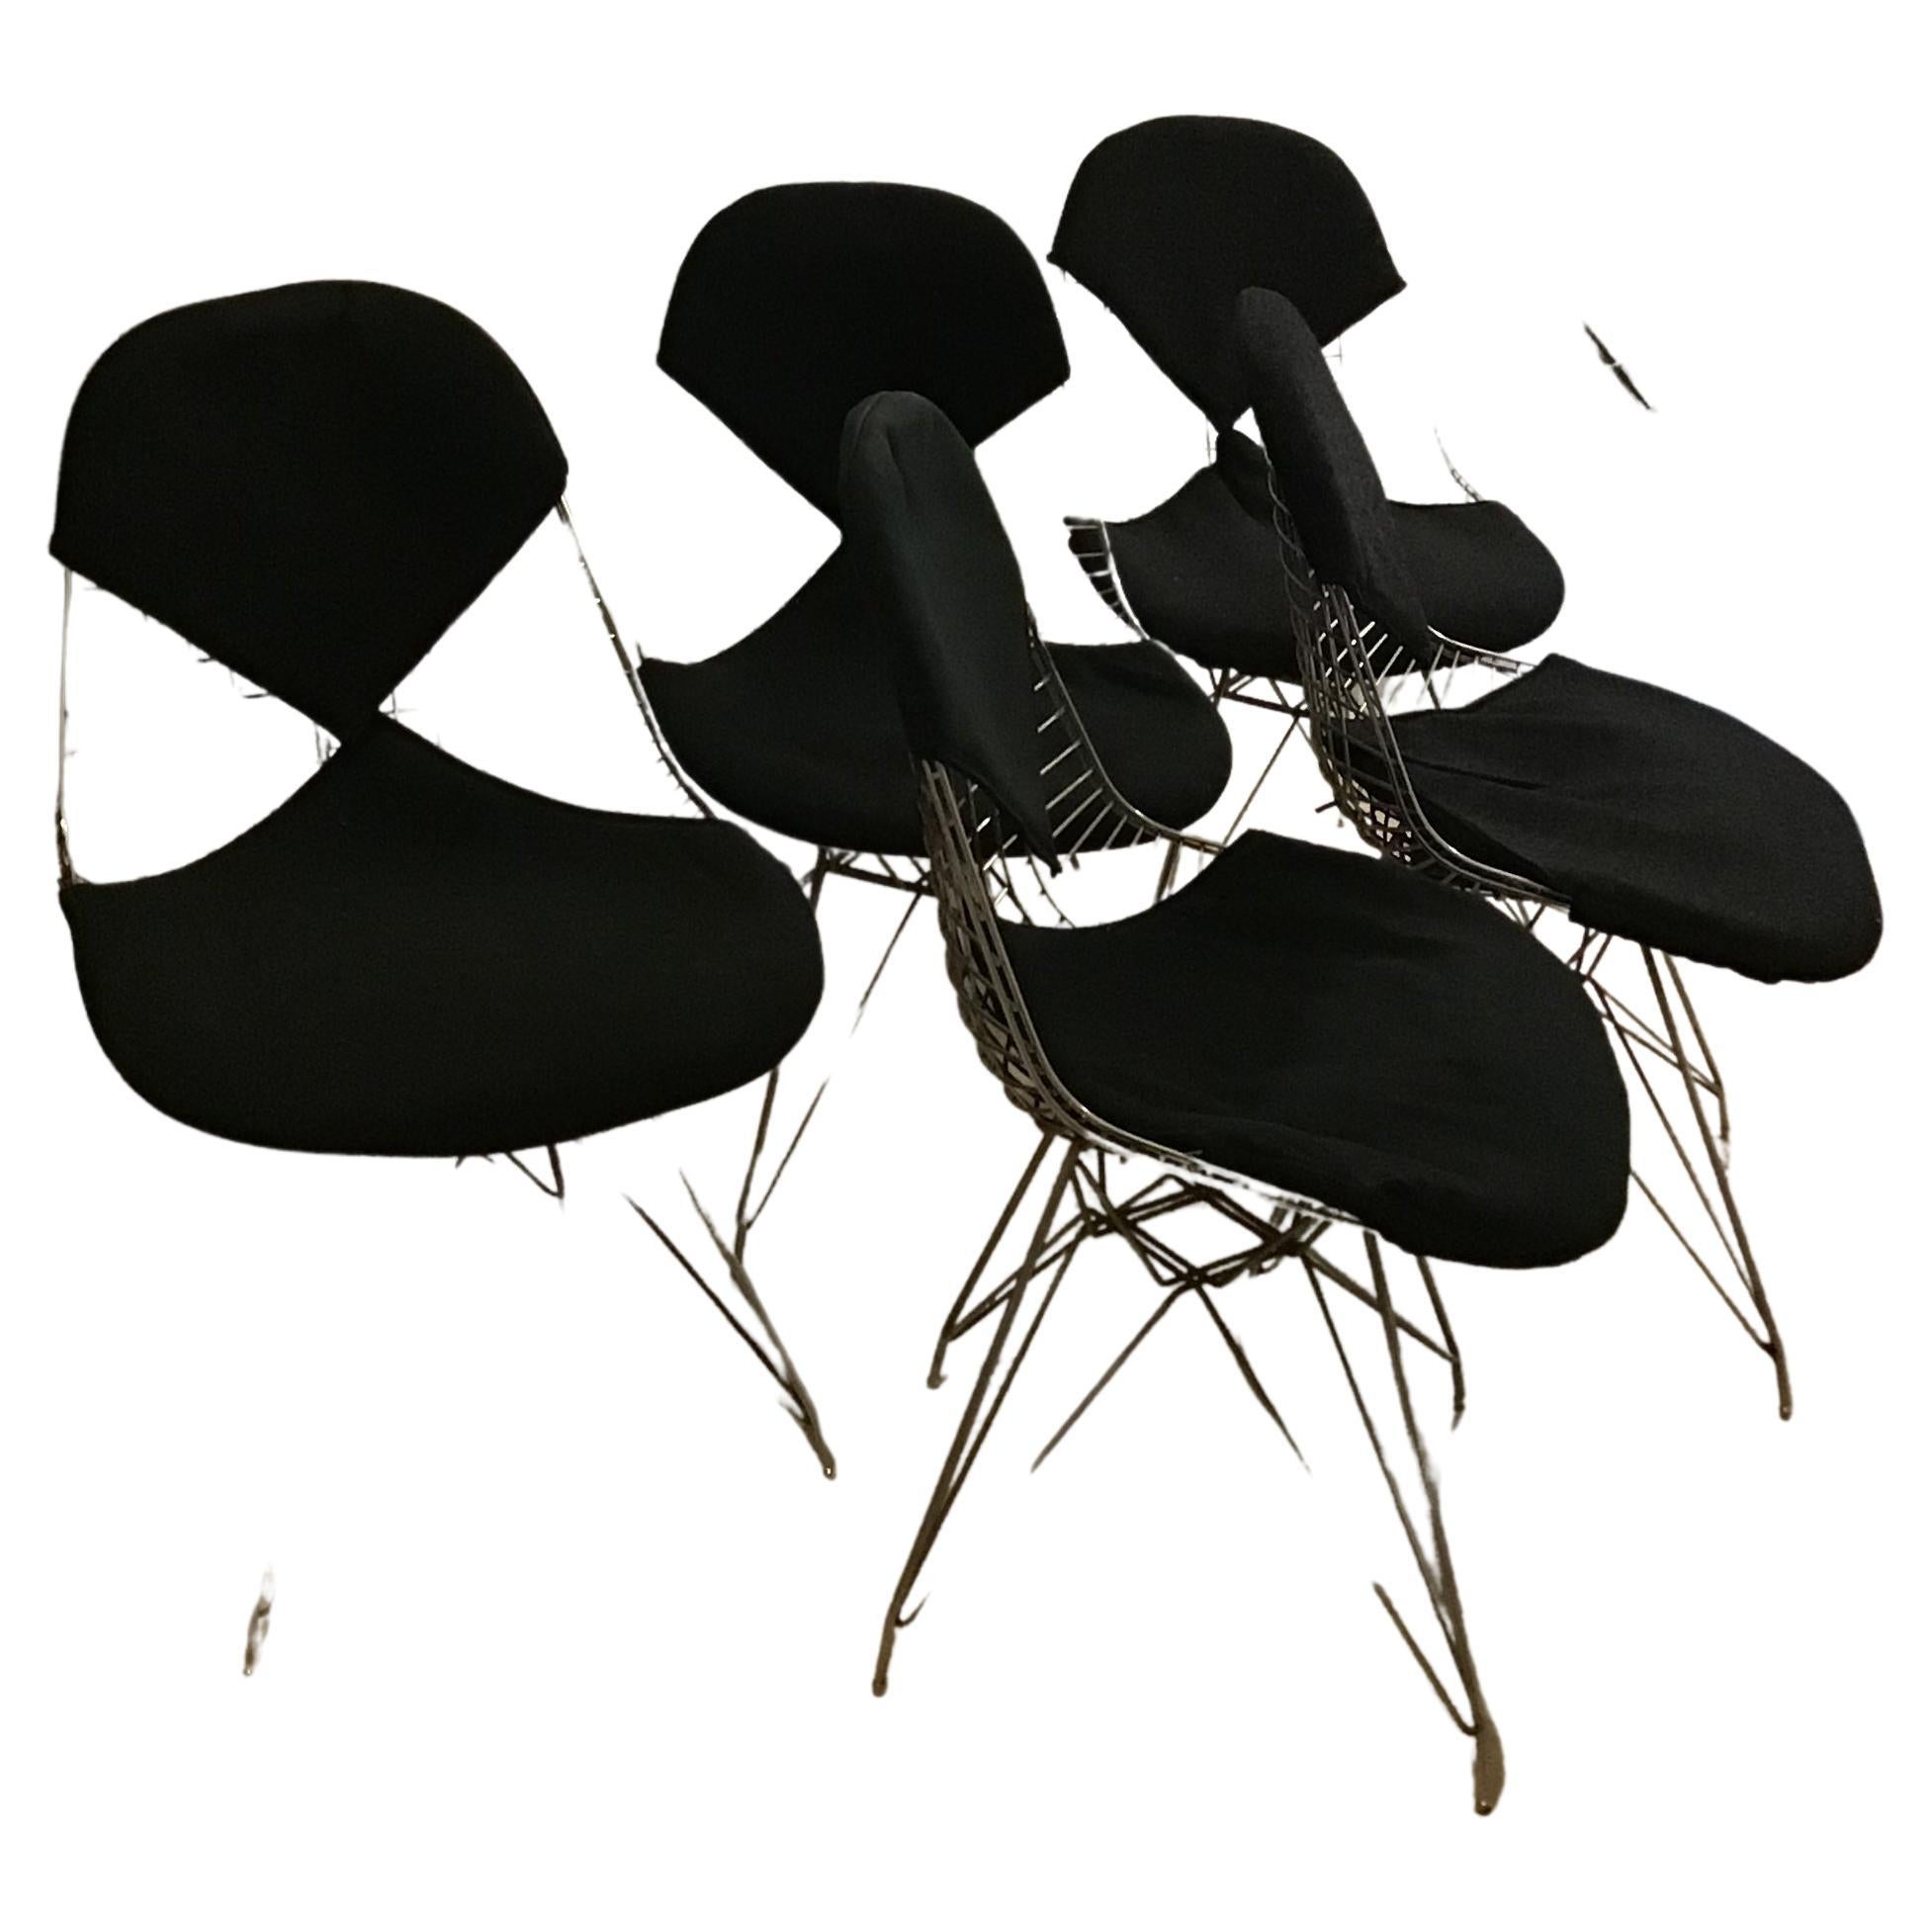 Charles e Ray Eames Stühle aus Metall, Crome, 1970, Italien im Angebot